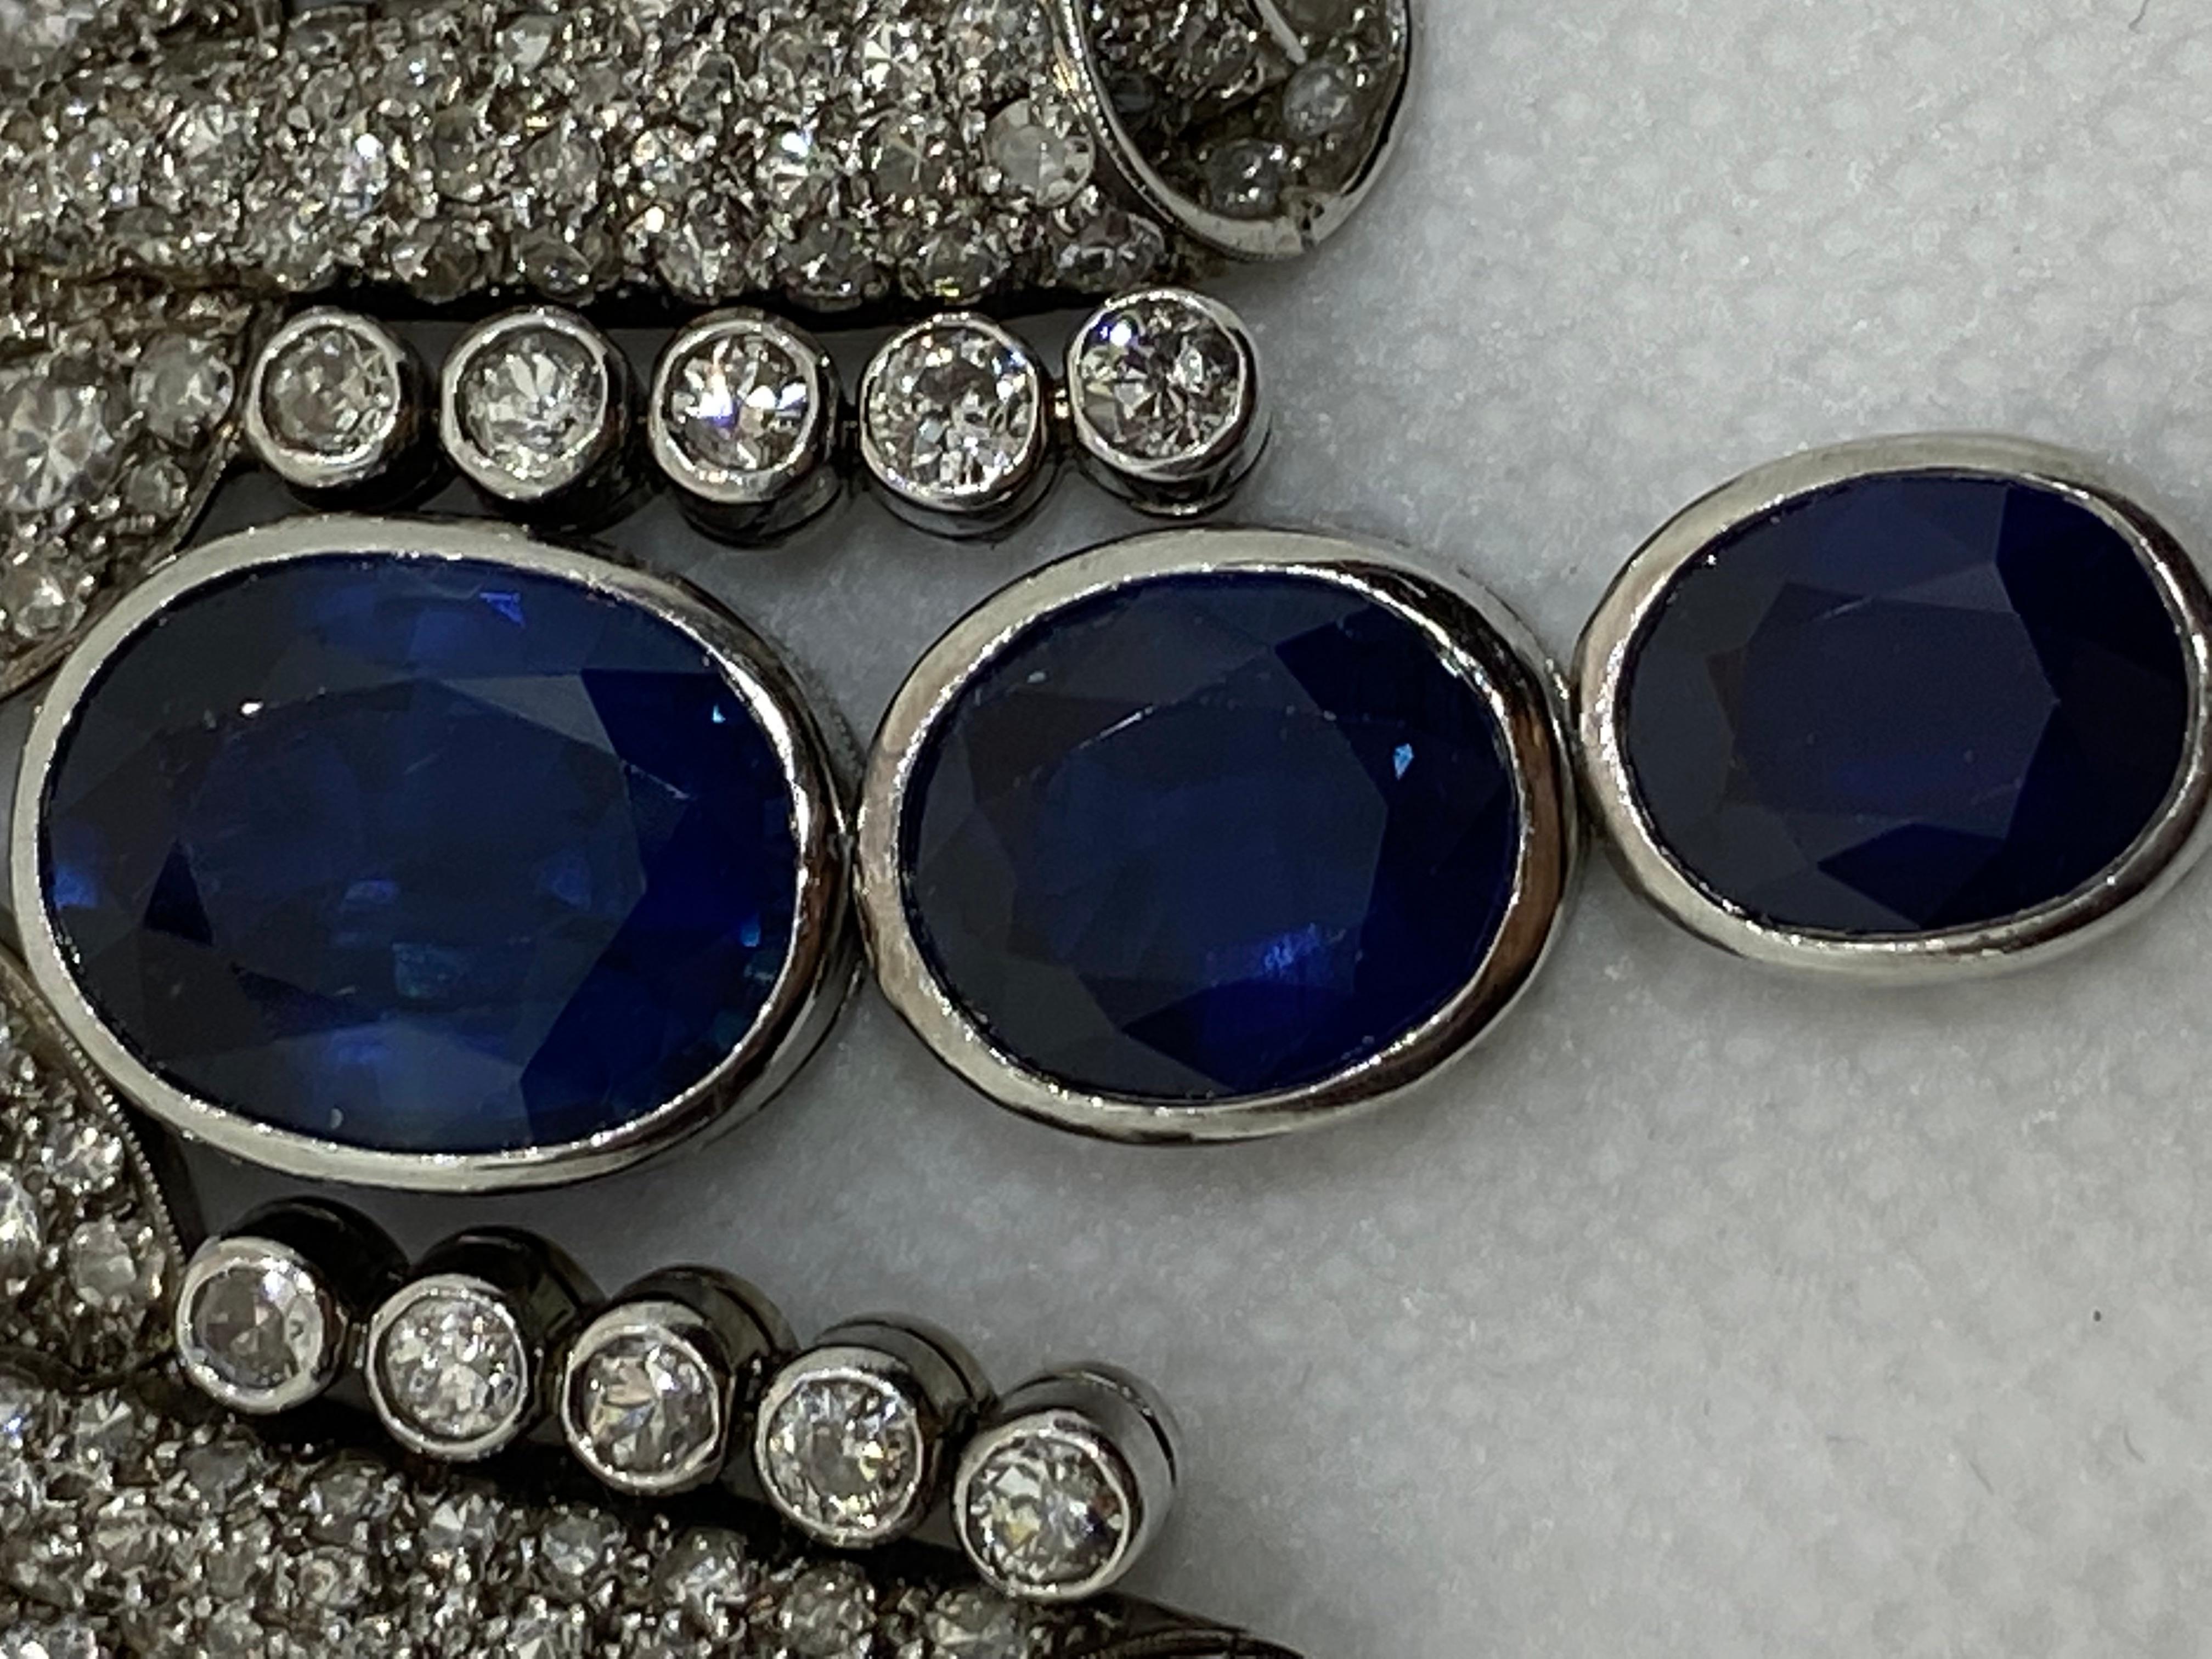 AGL-Certified Sapphire Necklace with Diamonds.
The front is set with three graduating oval sapphires (7.89, 5.01, and 3.64 ct). The biggest sapphire is AGL-certified. The gems are mounted in platinum. Diamonds are weighing approx. 29.77 ct.
The size